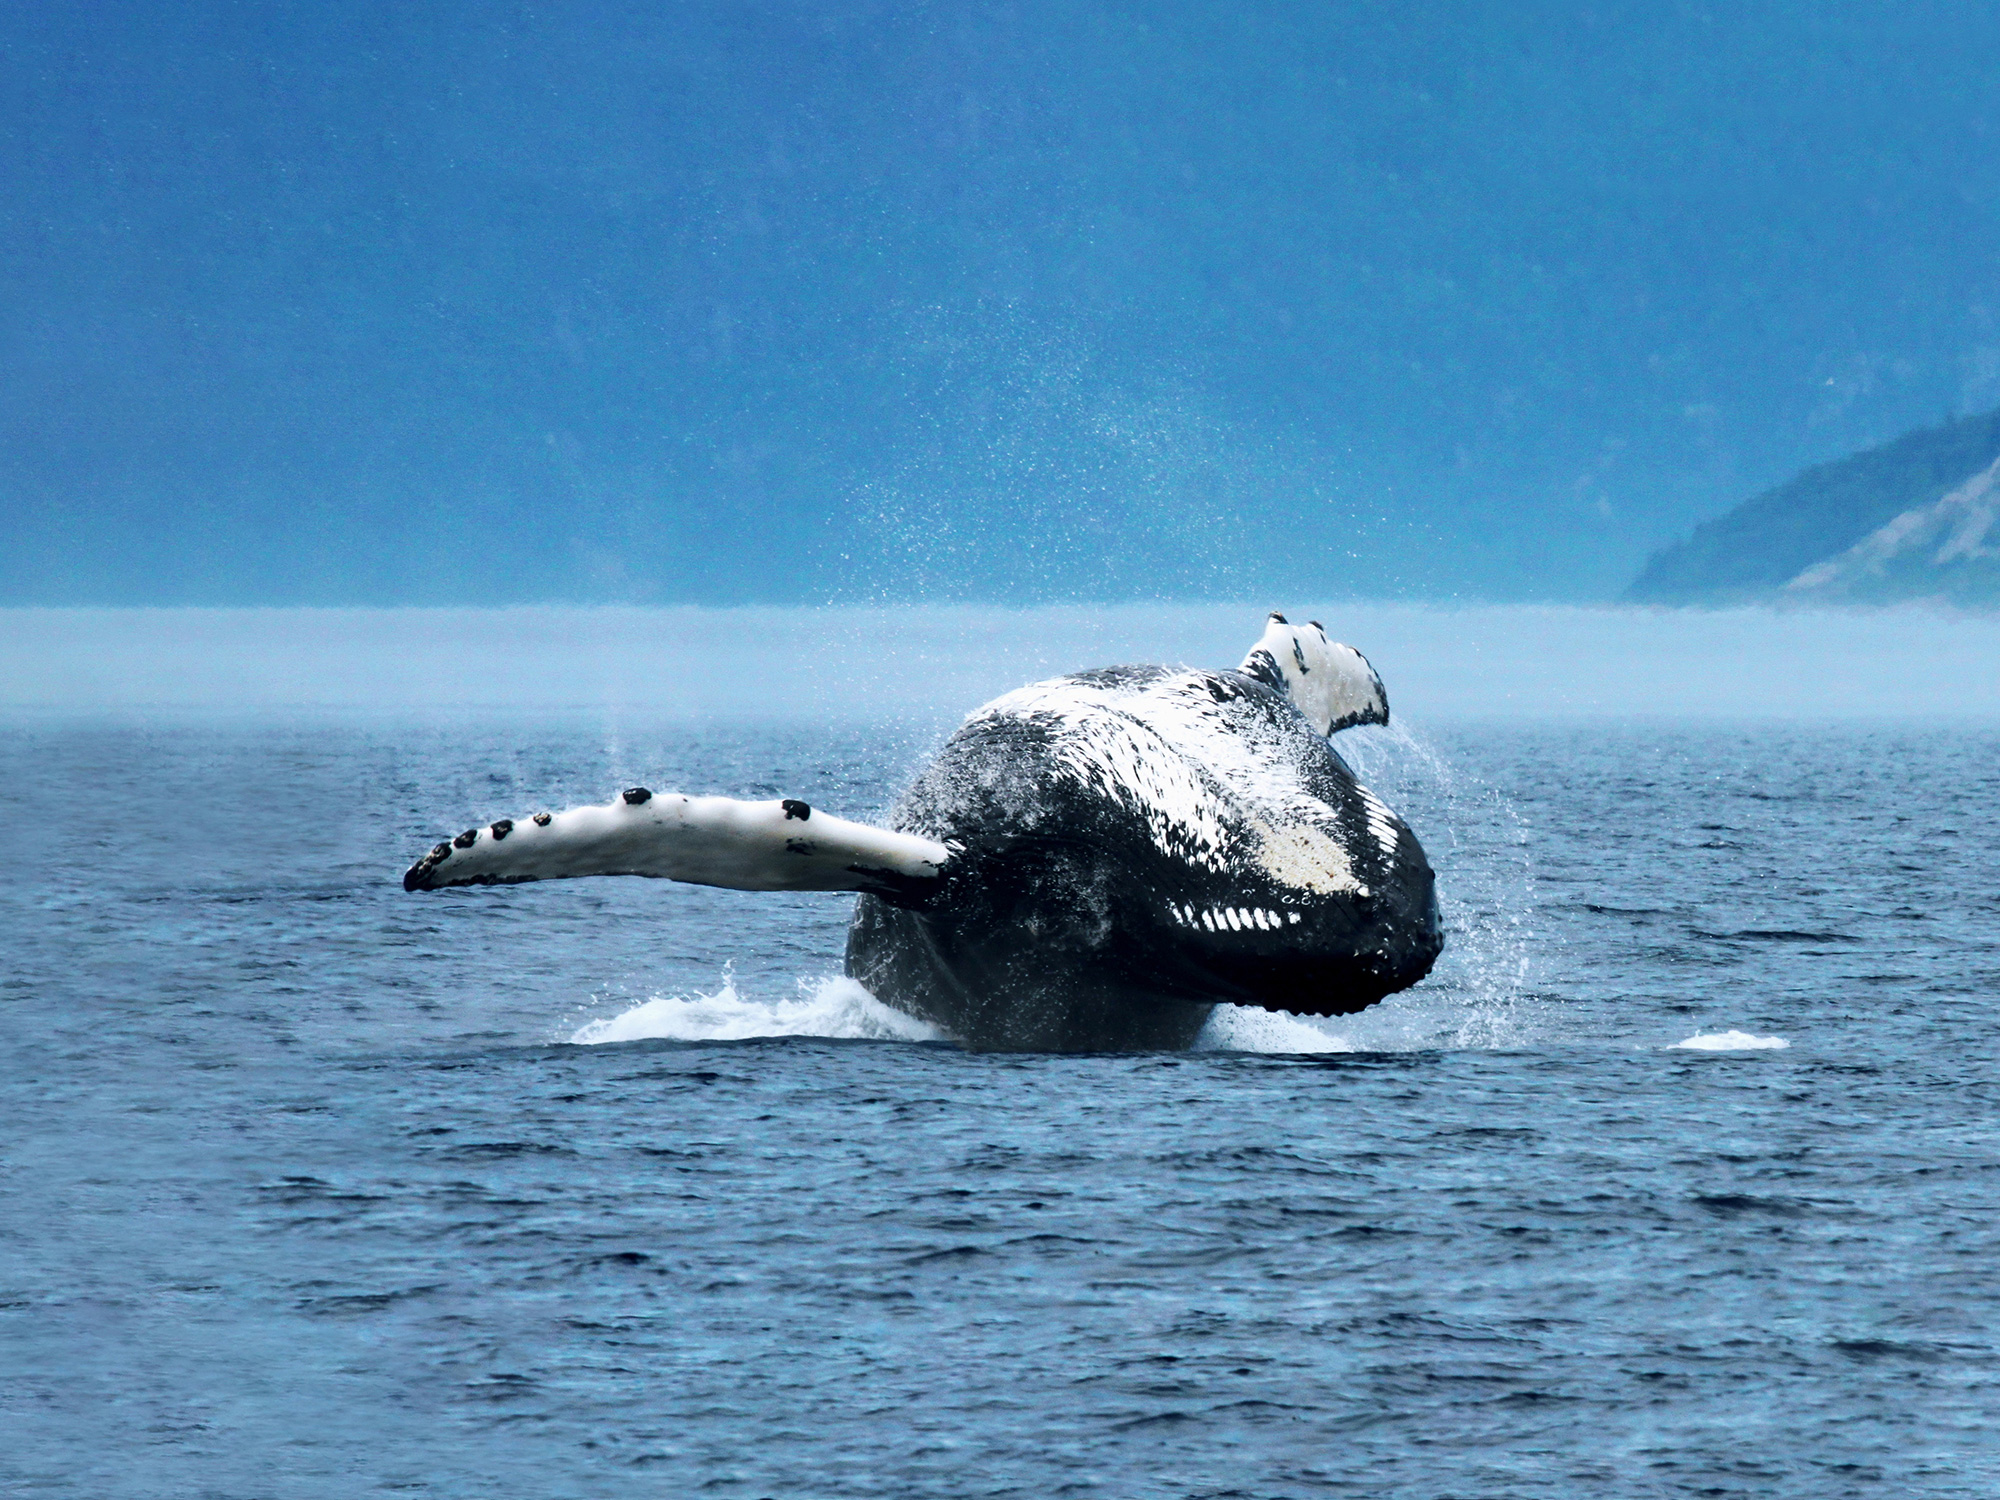 Whale breaching the water’s surface